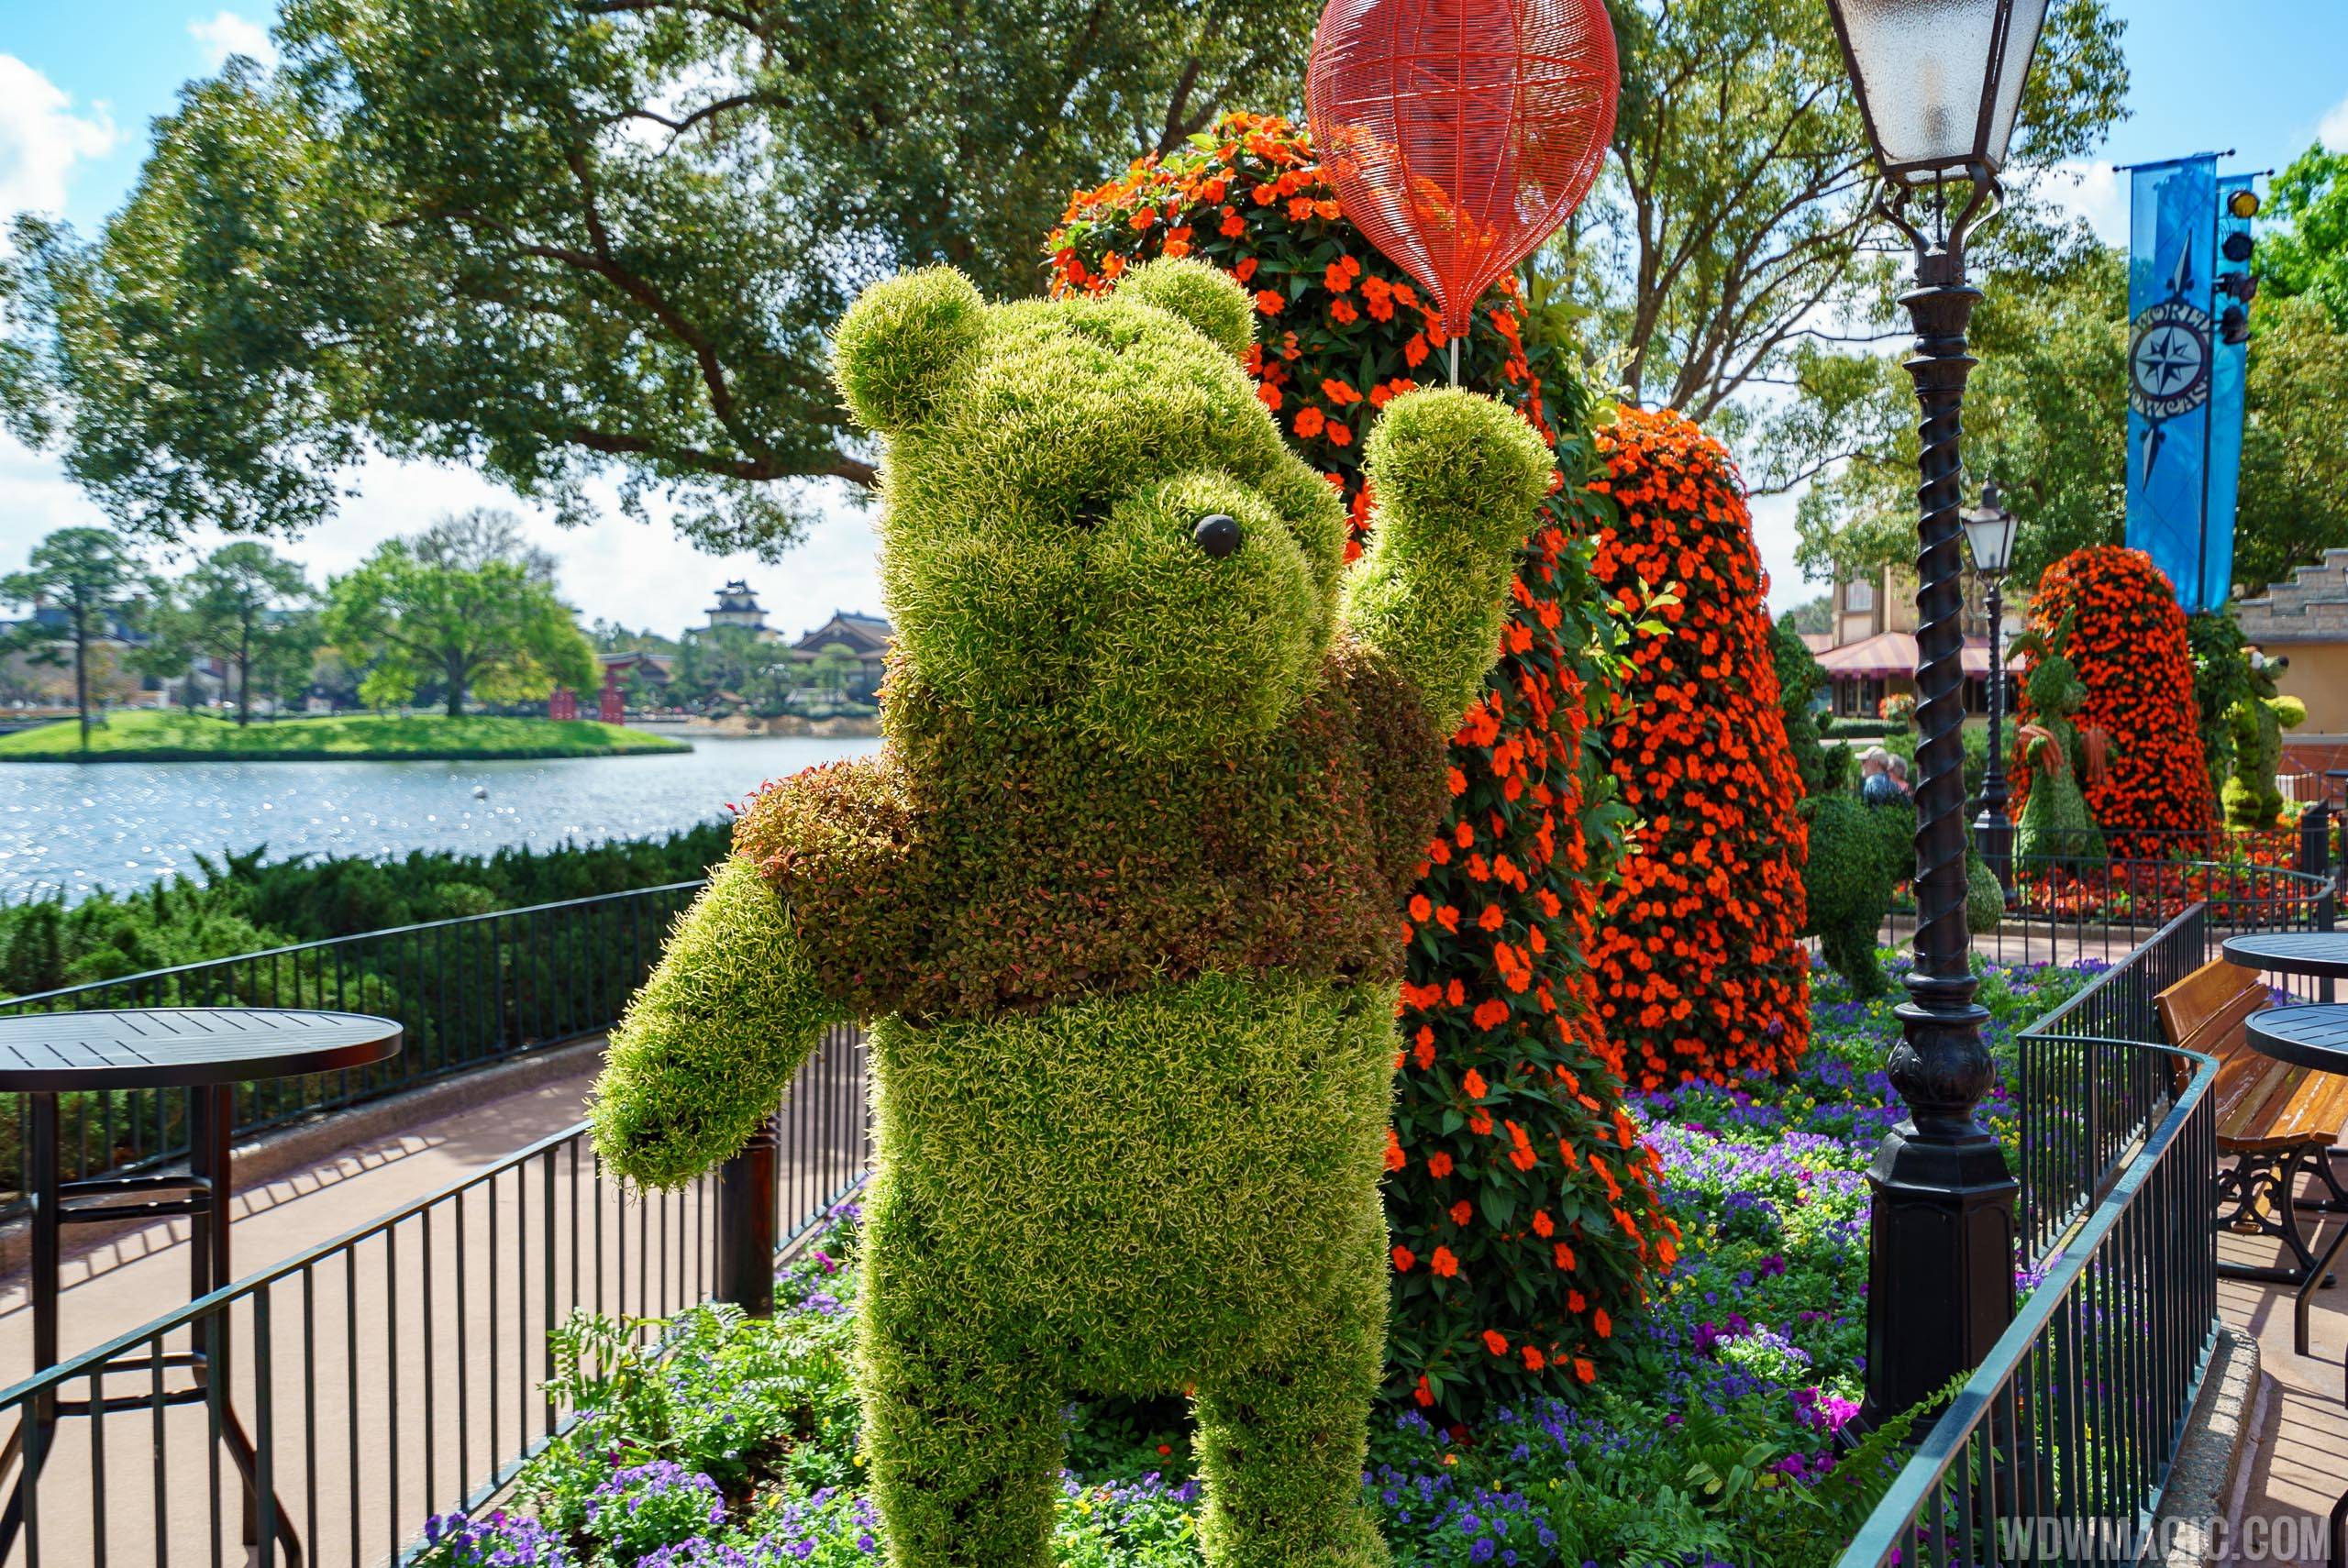 2017 Flower and Garden Festival - Winnie the Pooh topiary at the UK Pavilion